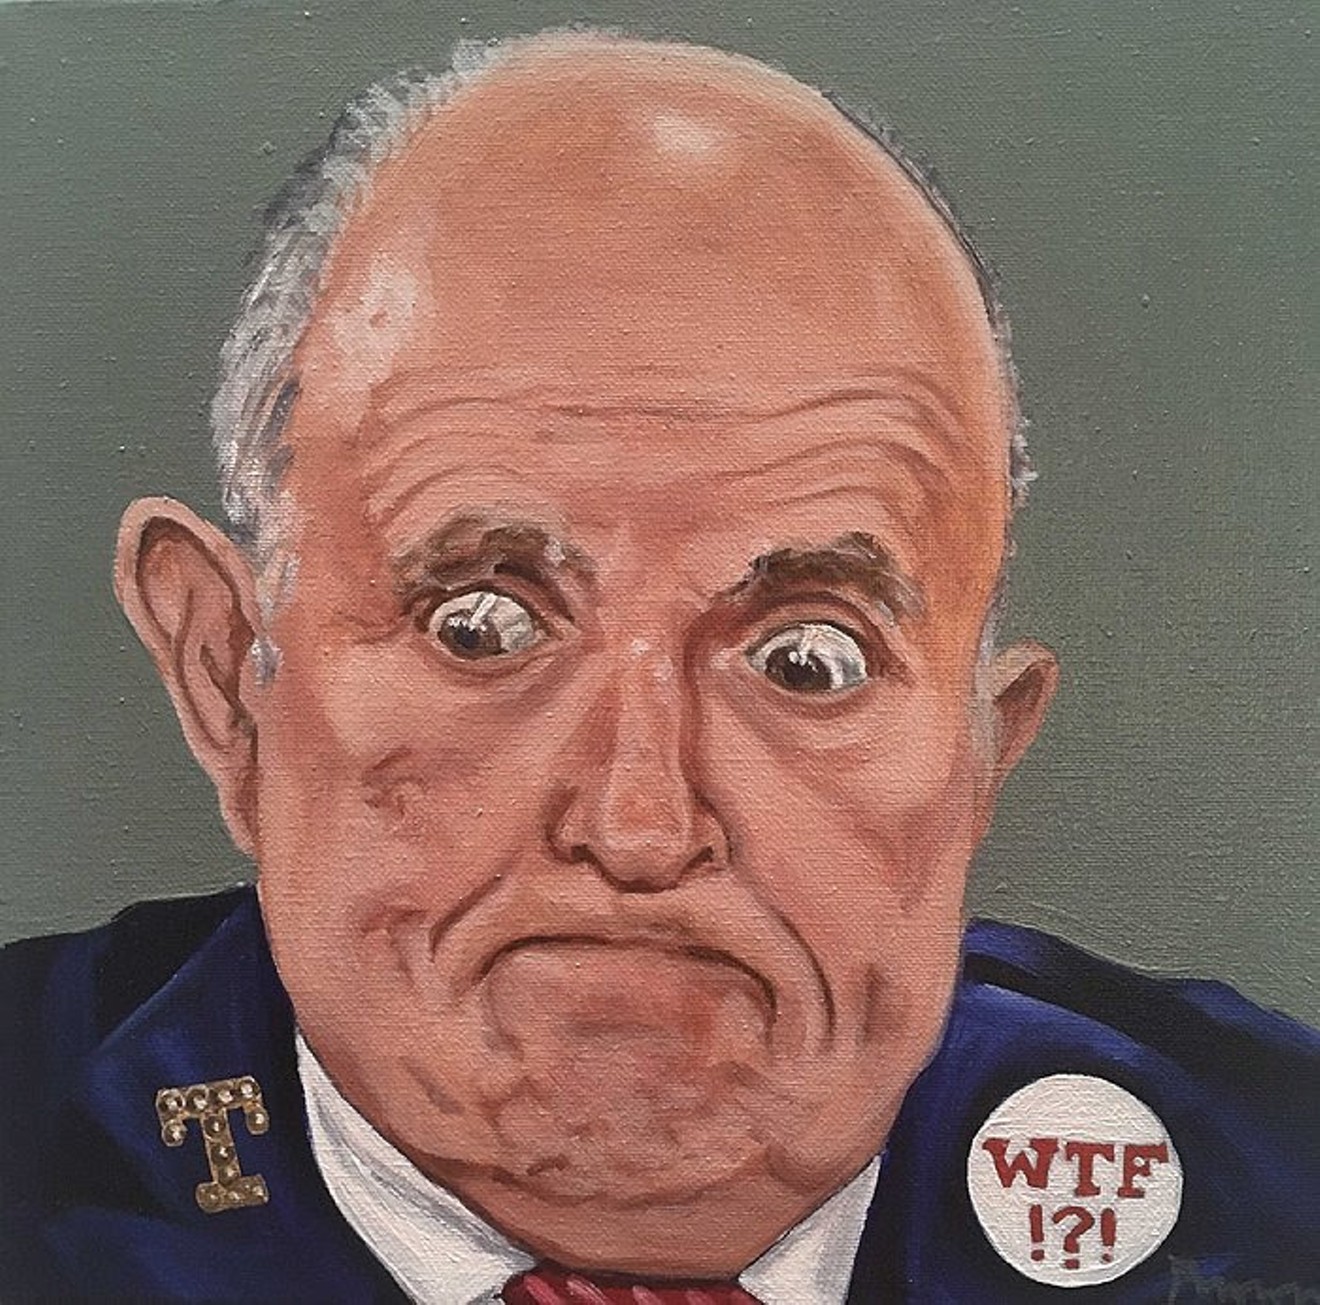 Painting of former mayor of New York City and Trump attorney Rudy Giuliani.